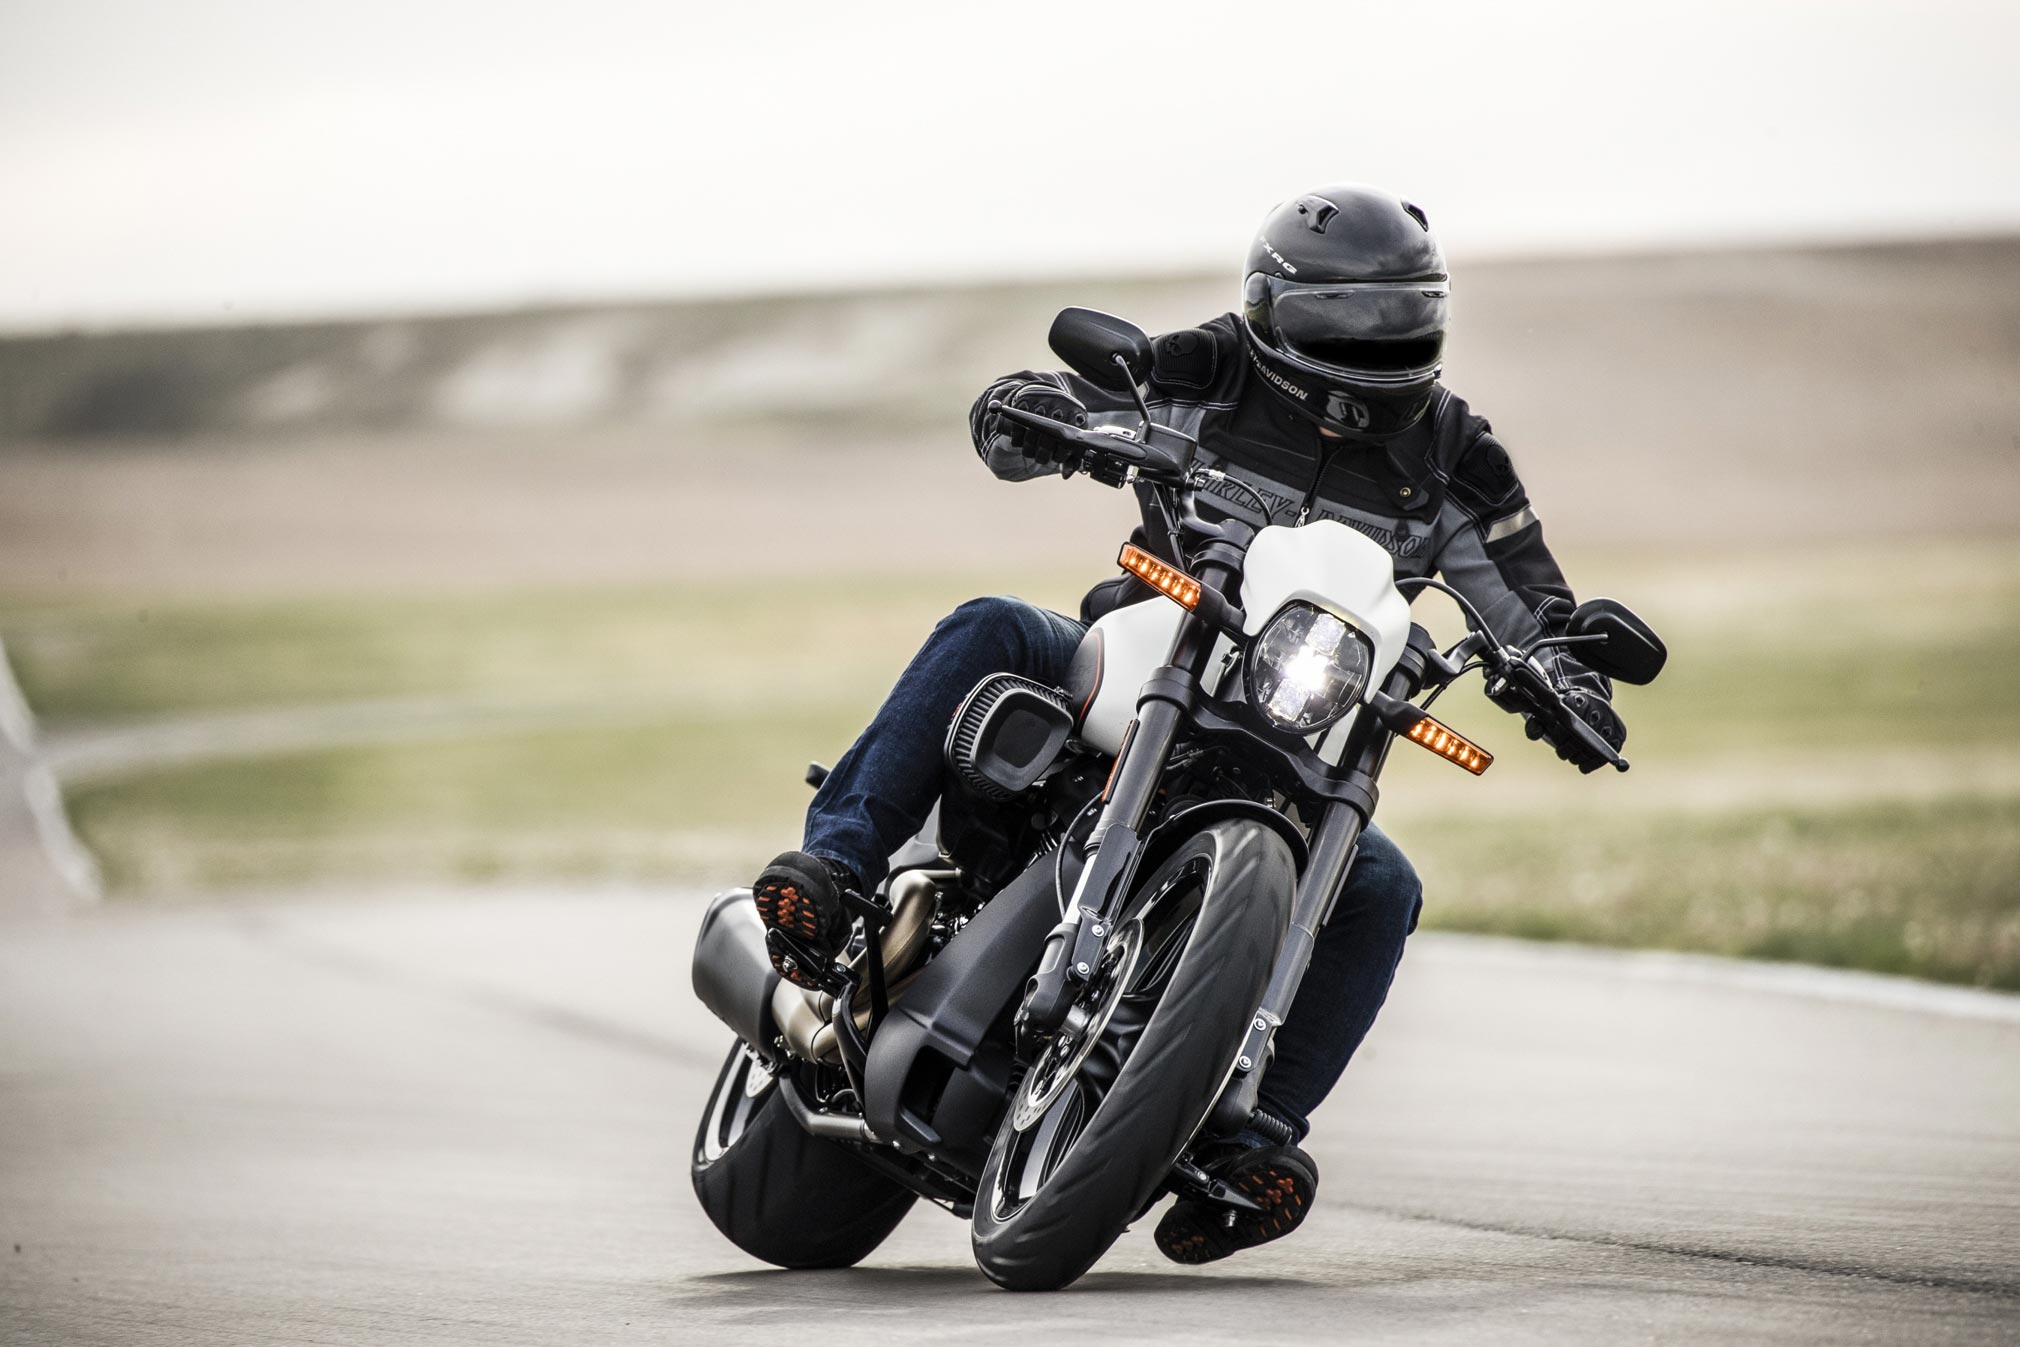 2020 Harley-Davidson Softail FXDR 114 Guide • Total Motorcycle